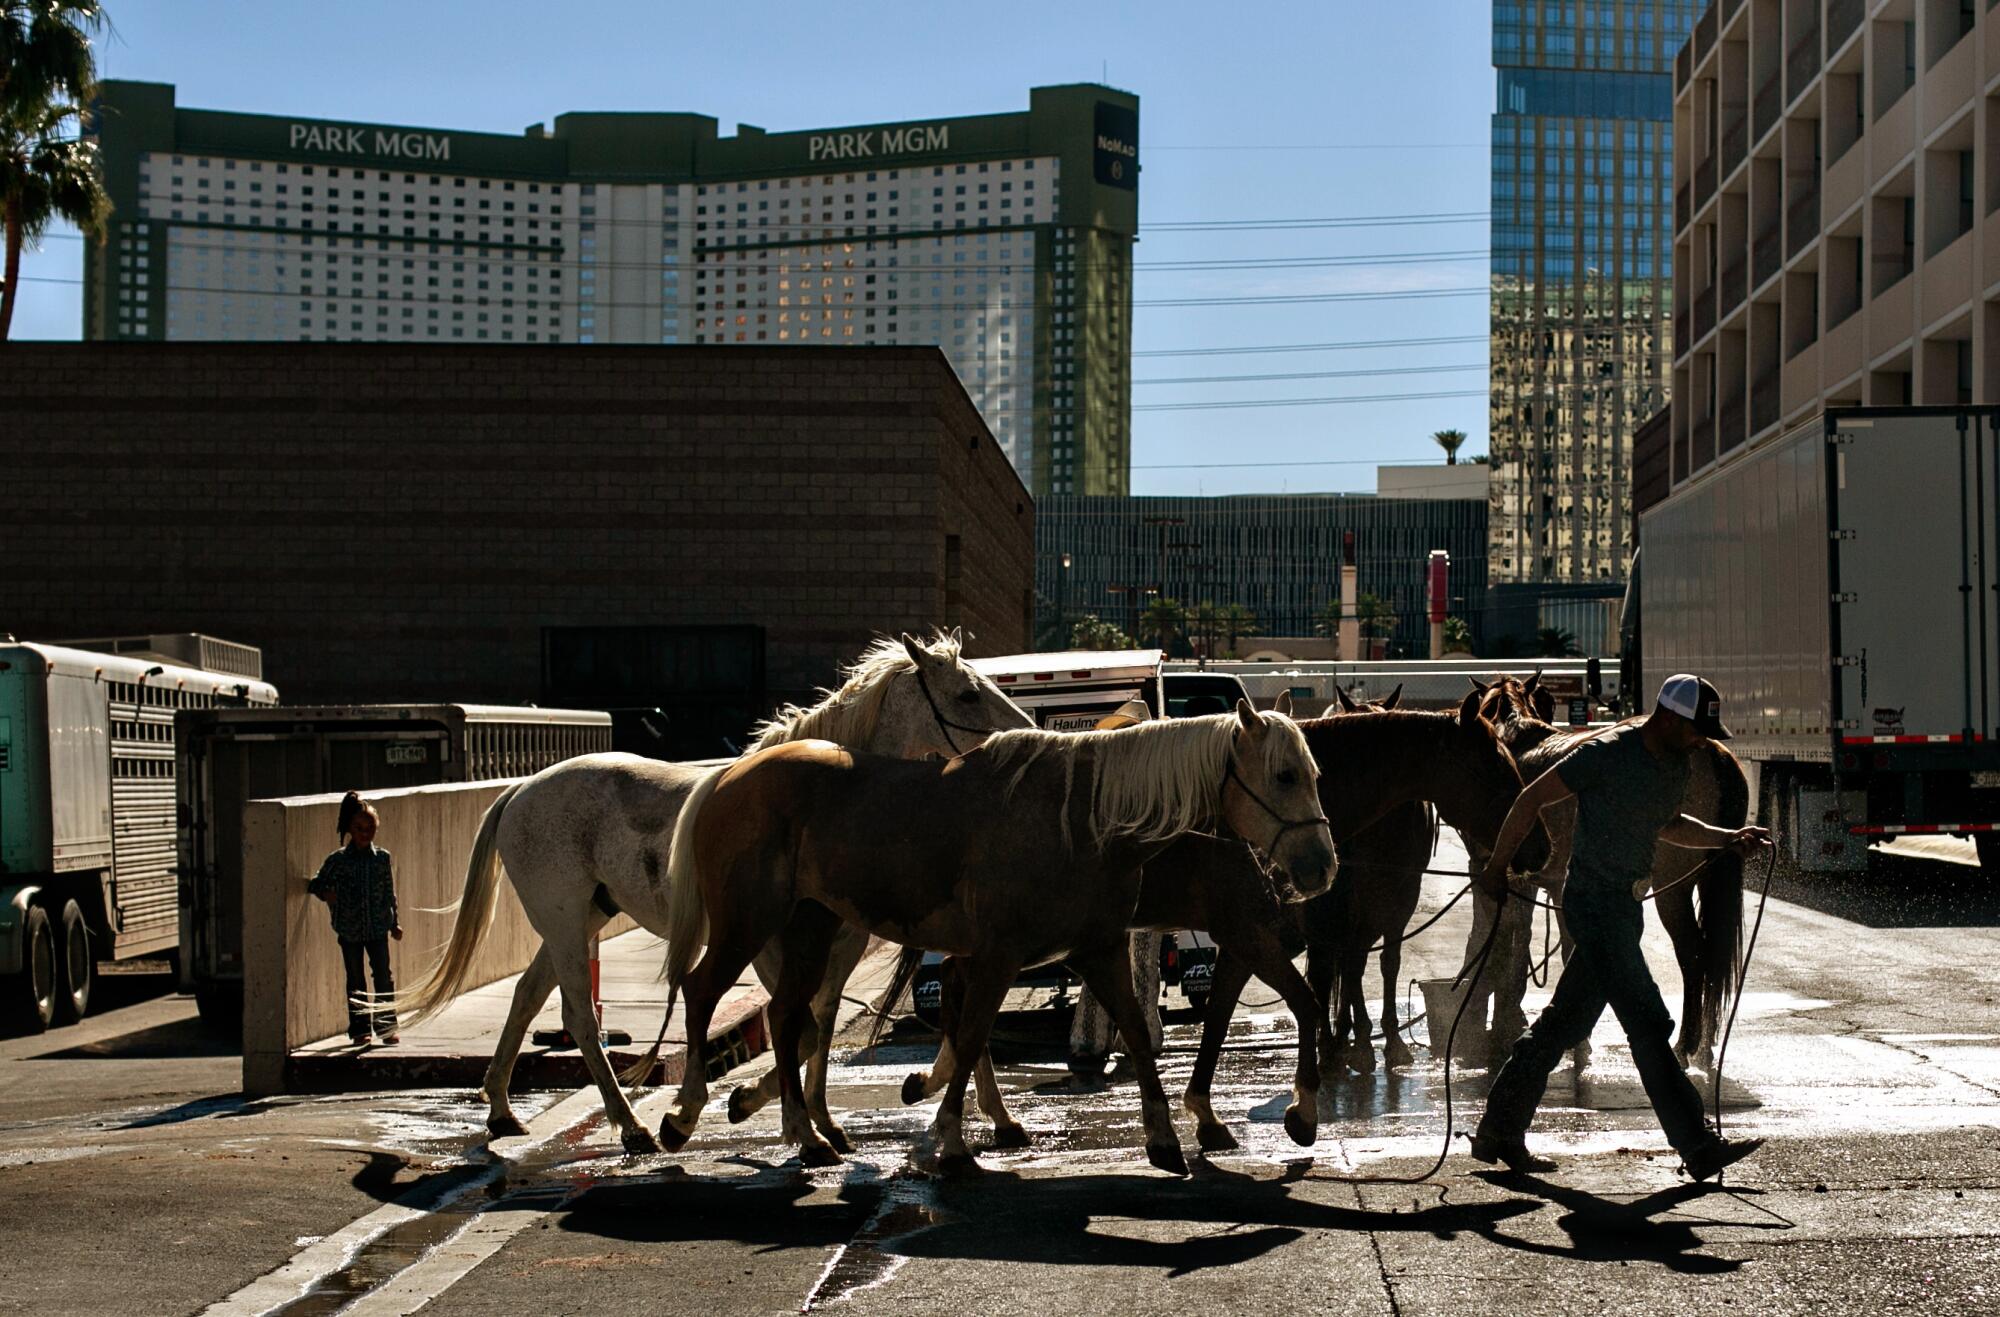 Horses are hosed down for relief from the heat in the street outside the arena